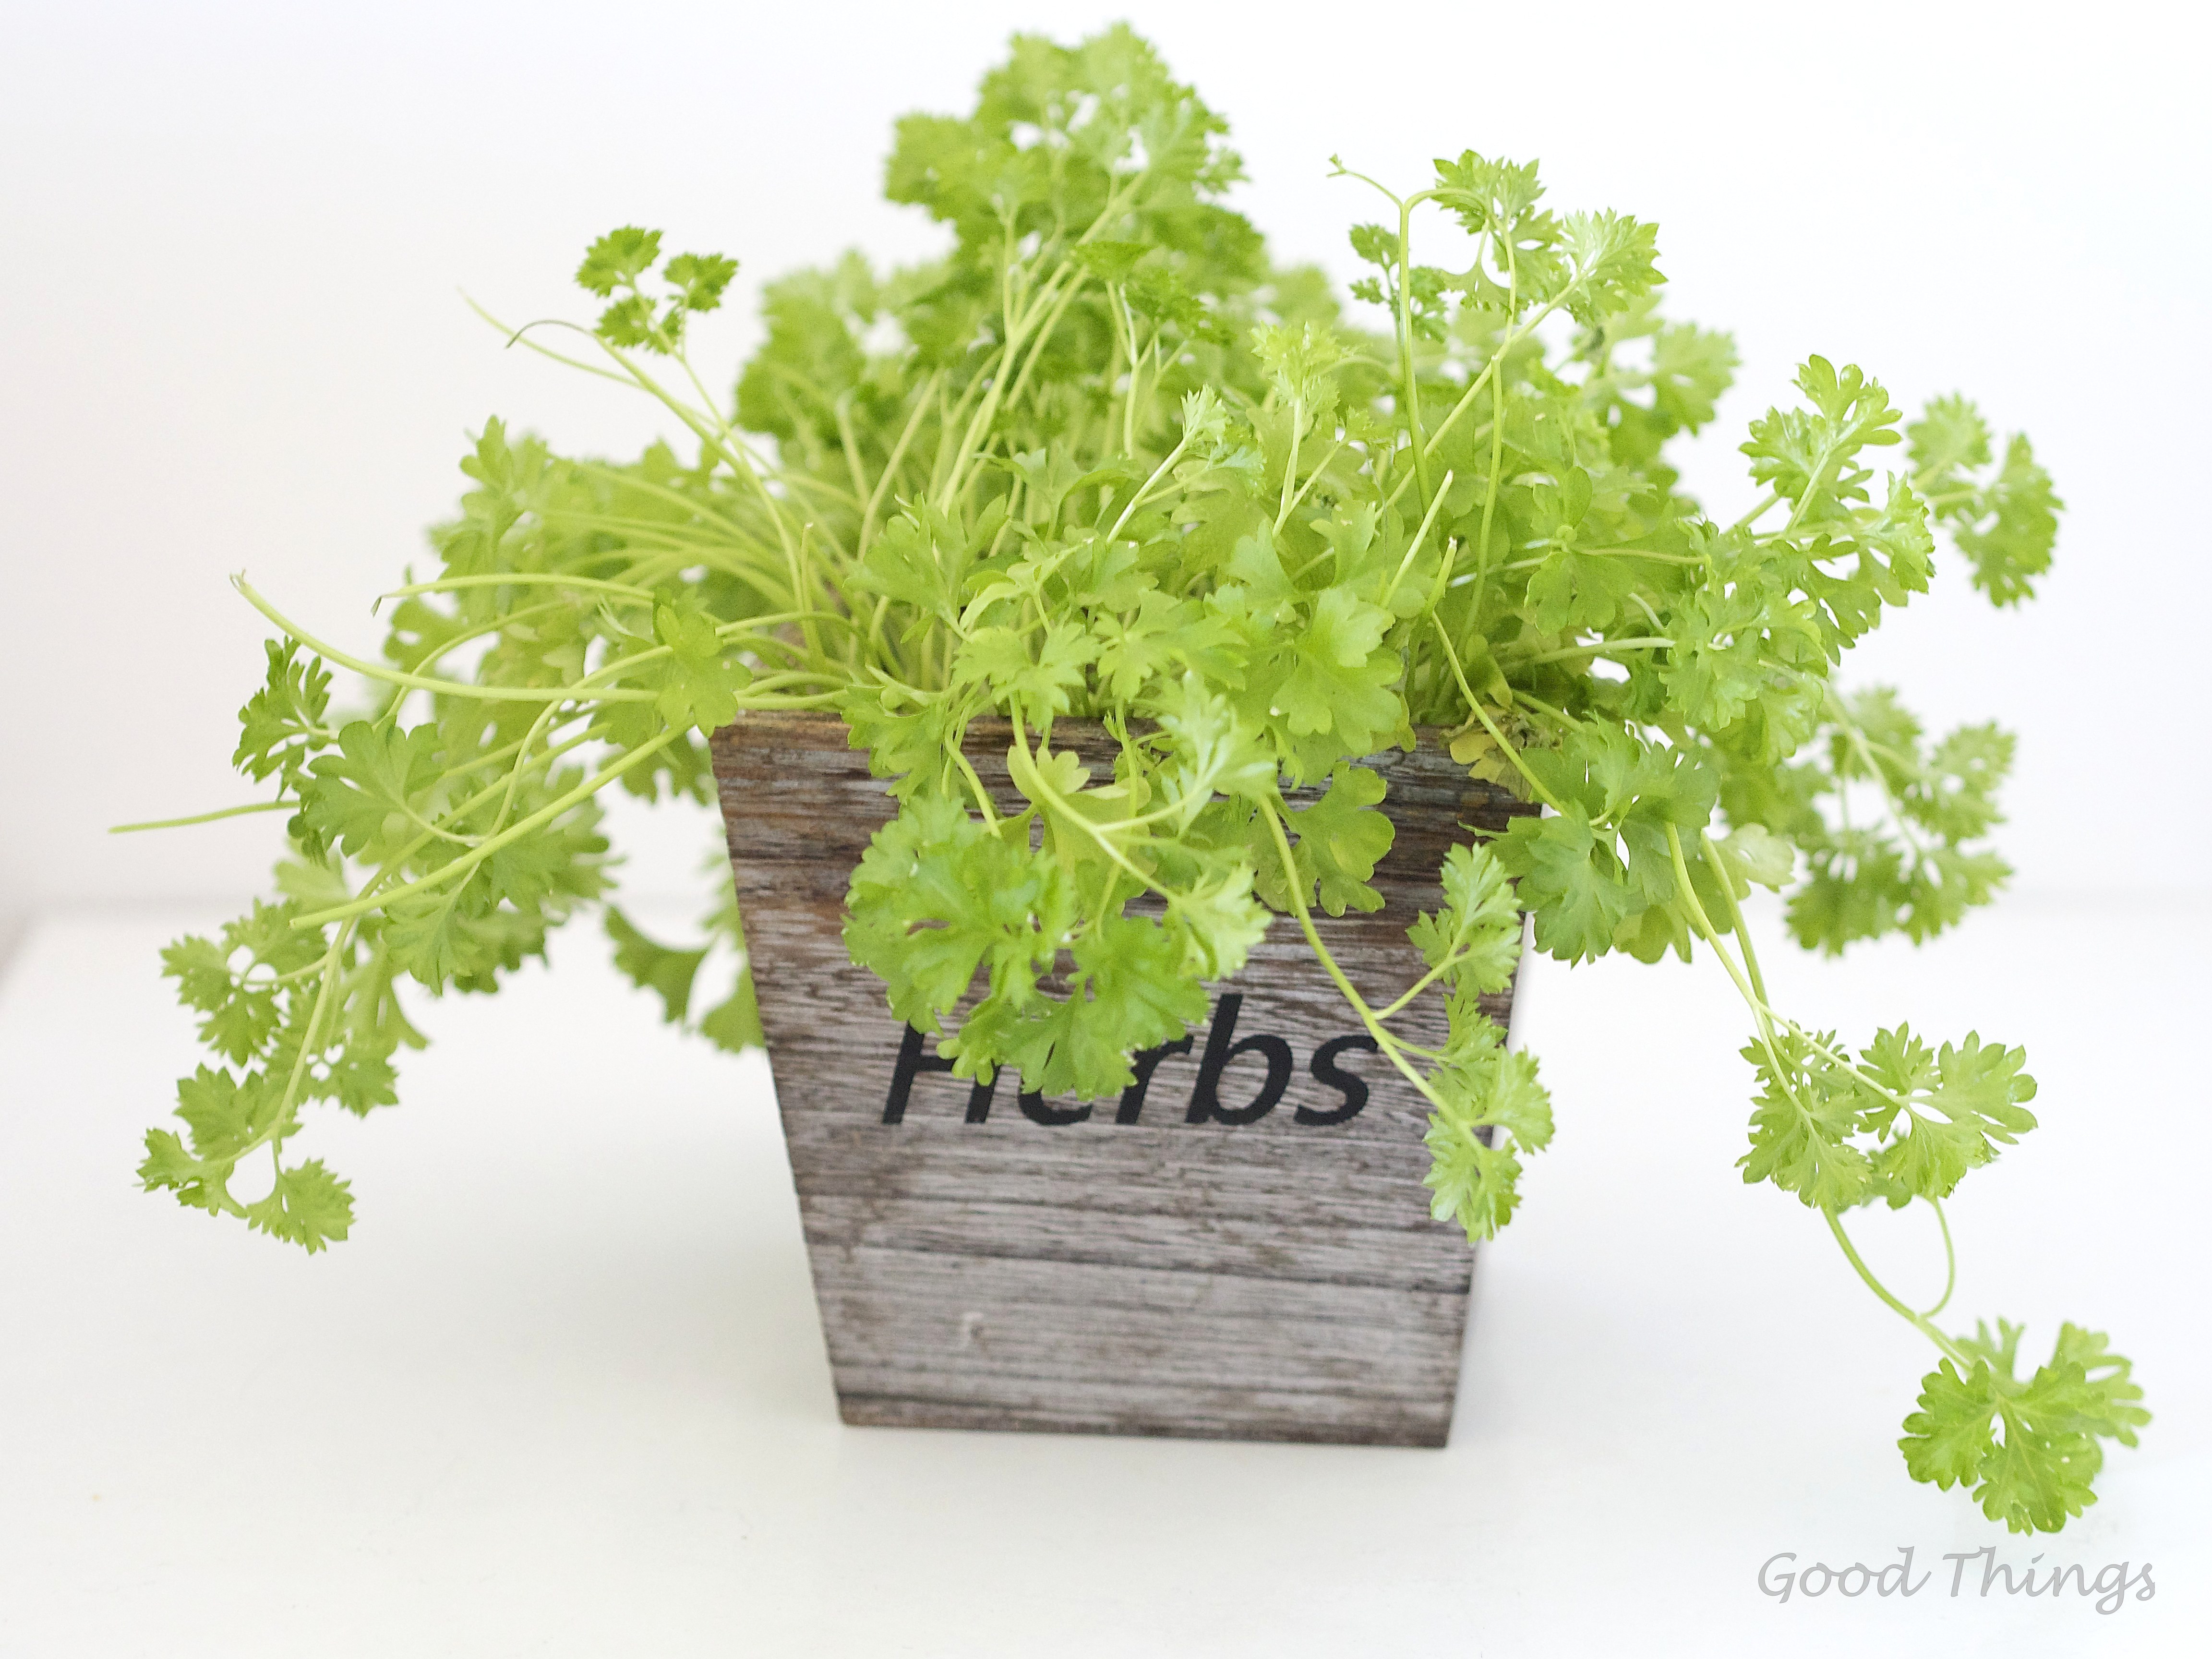 Potted parsley in my kitchen - Liz Posmyk, Good Things